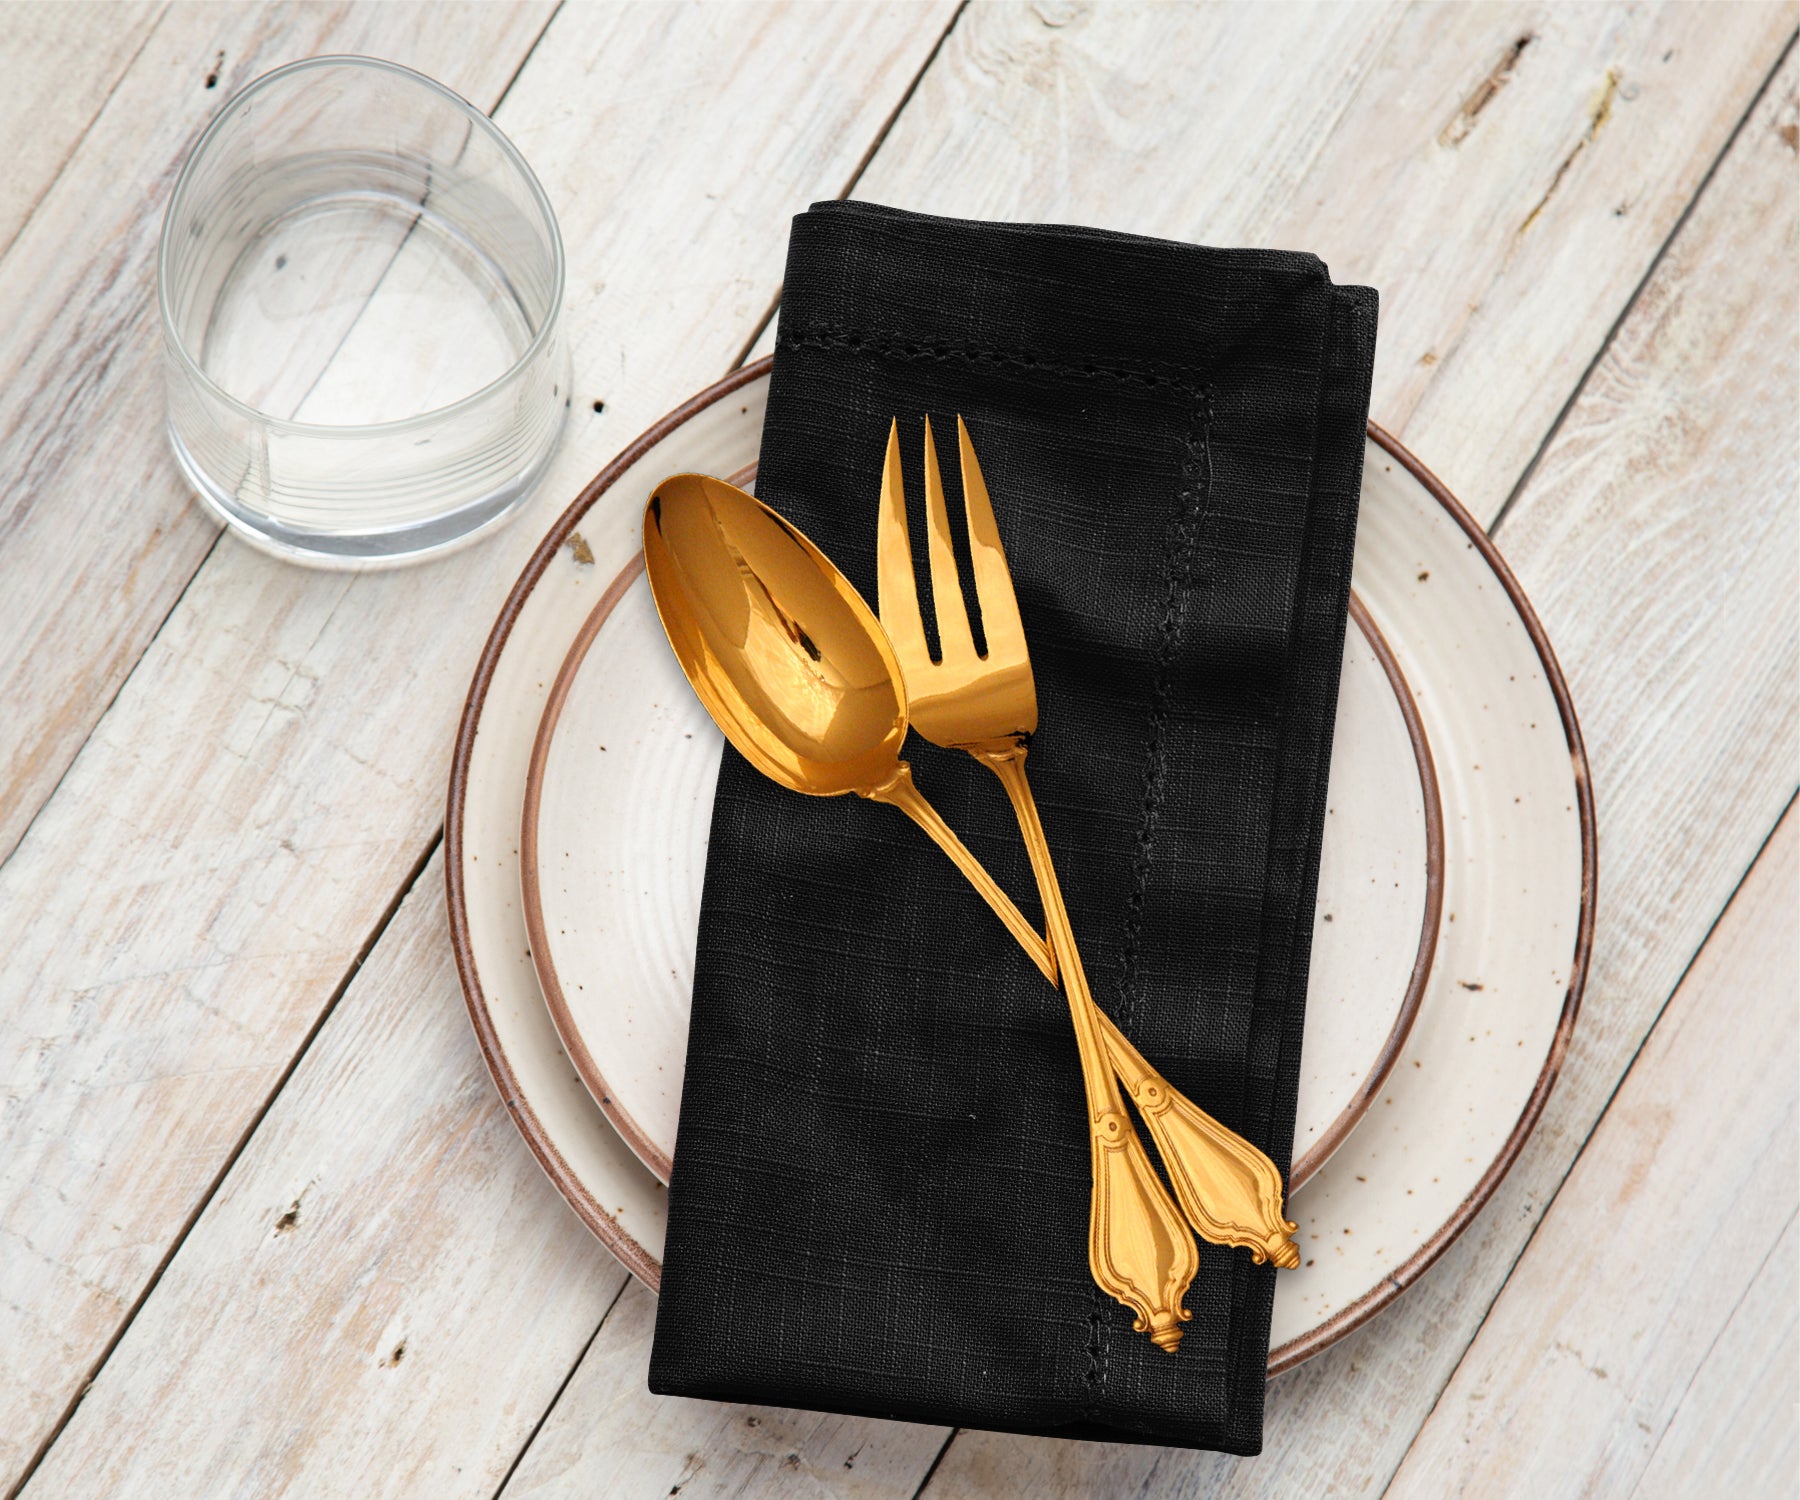 Versatile Black Fabric Napkins - Perfect for Formal and Casual Settings